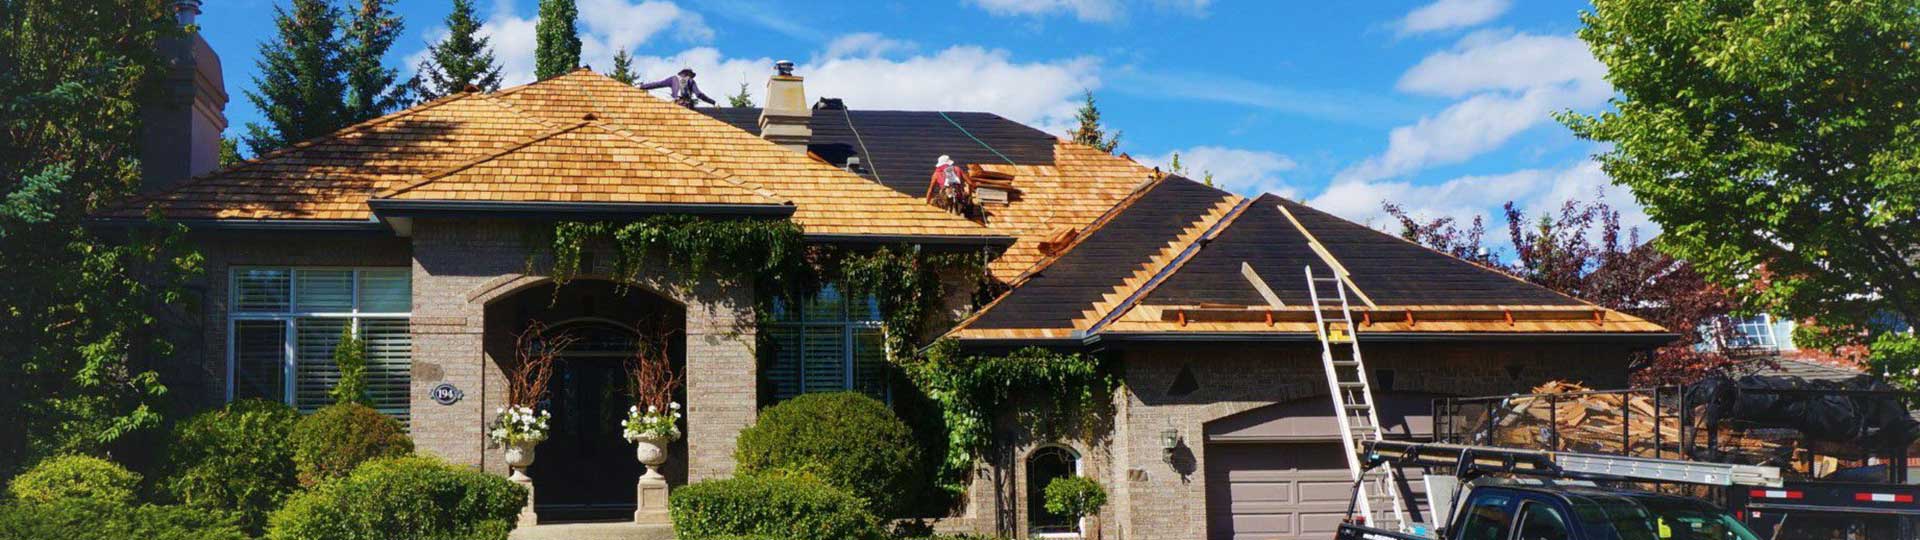 An image of a house undergoing a roof replacement, with new wood shingles being installed.